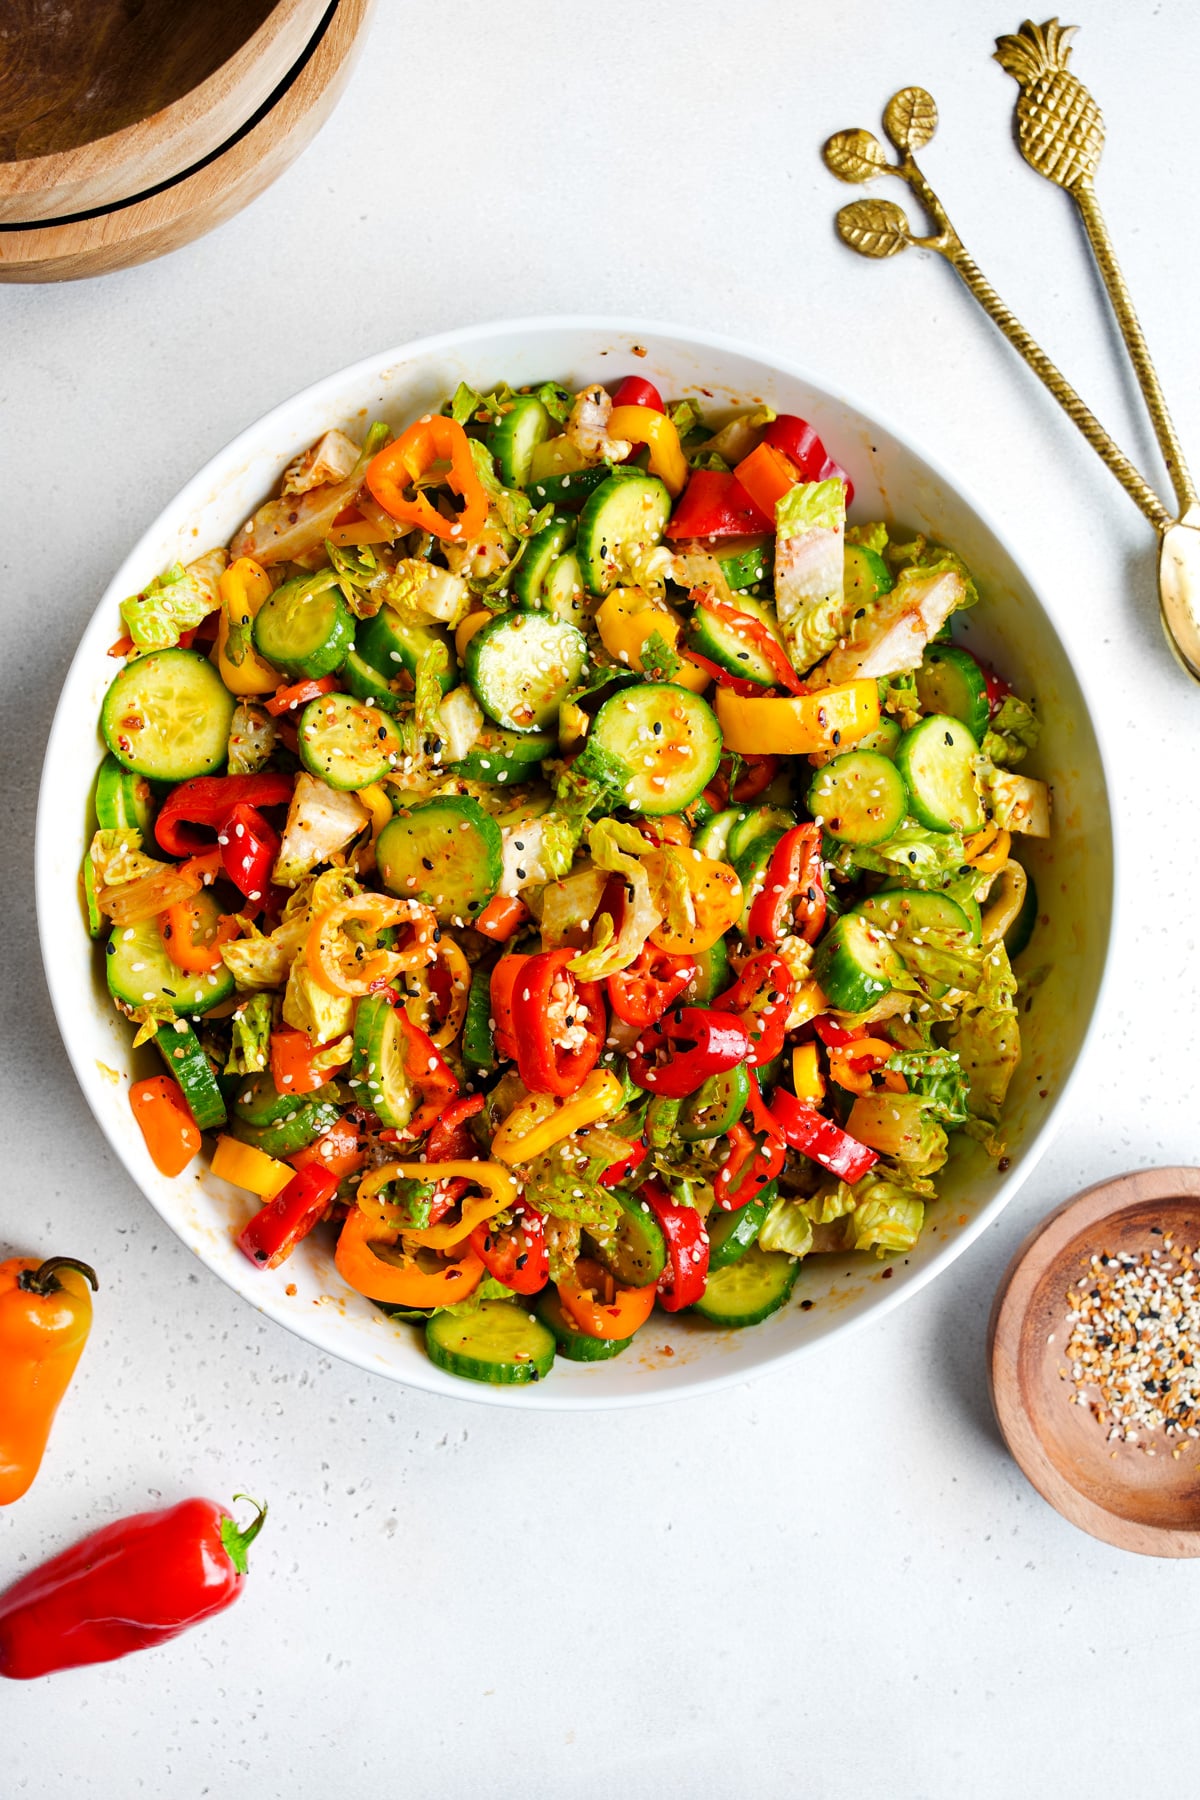 A cucumber and bell pepper salad.